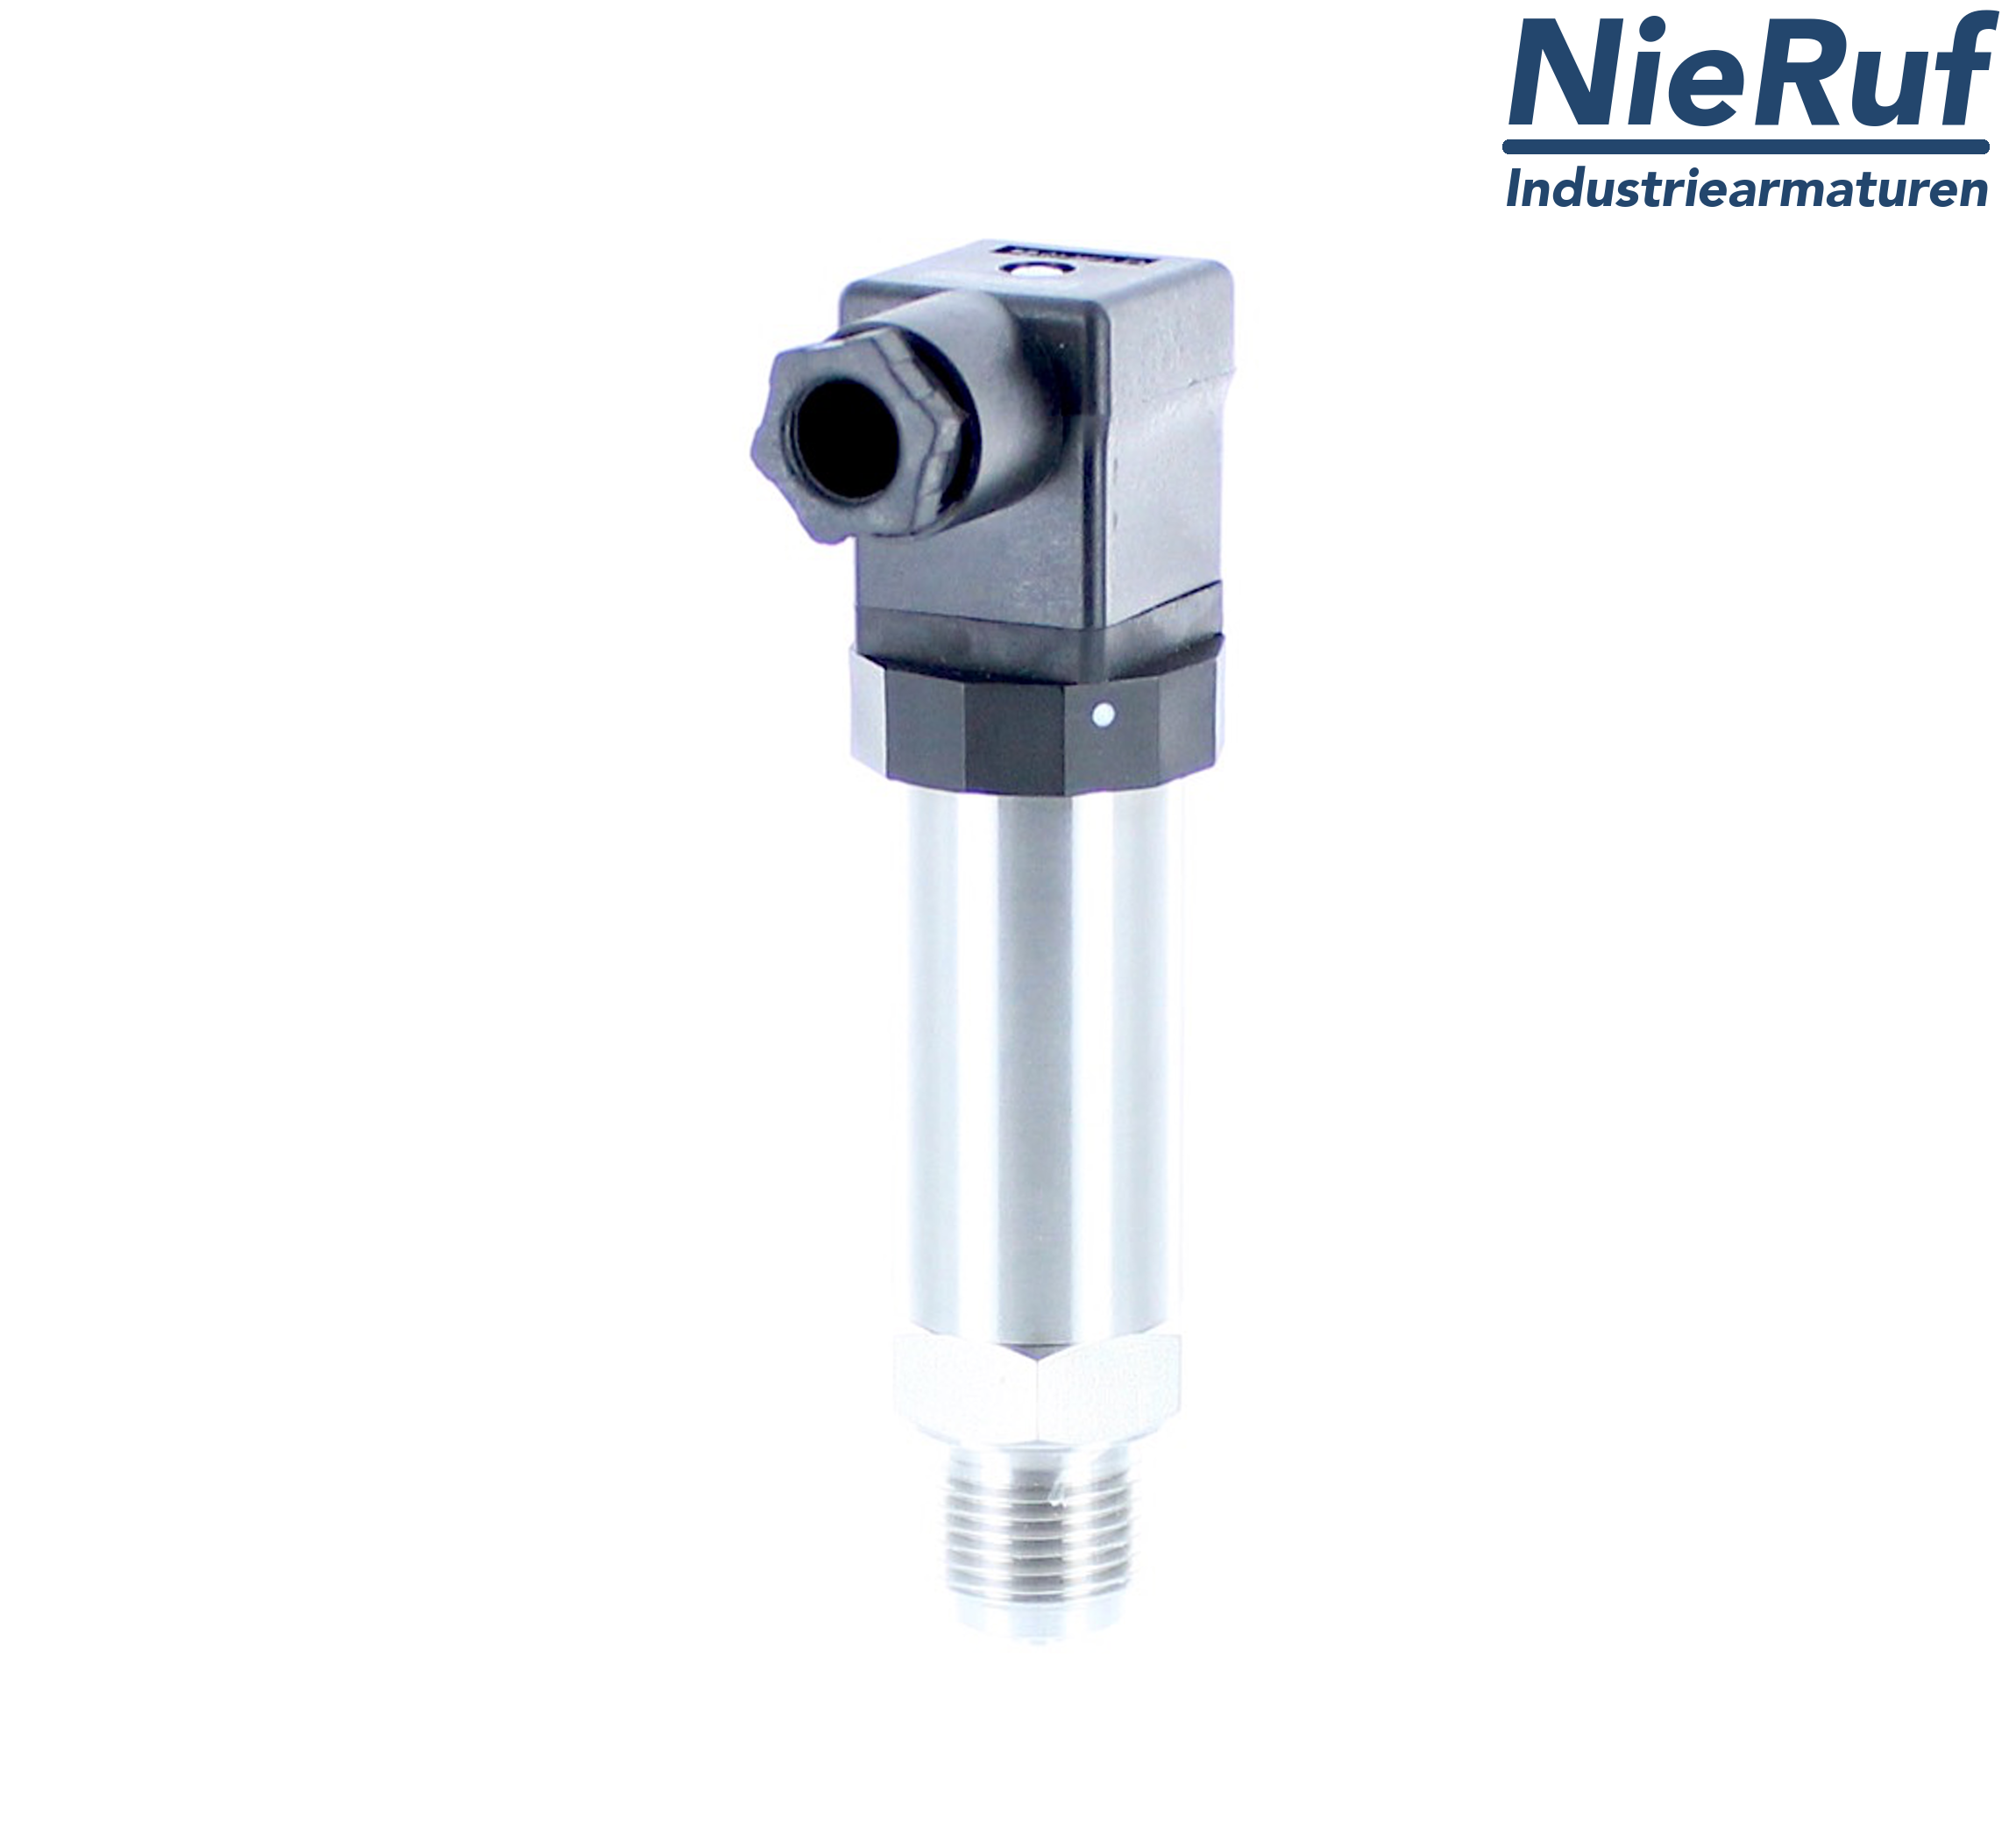 pressure sensor G 1/2" B DS01 stainless steel 2-wire: 4-20mA FPM 0,0 - 16,0 bar